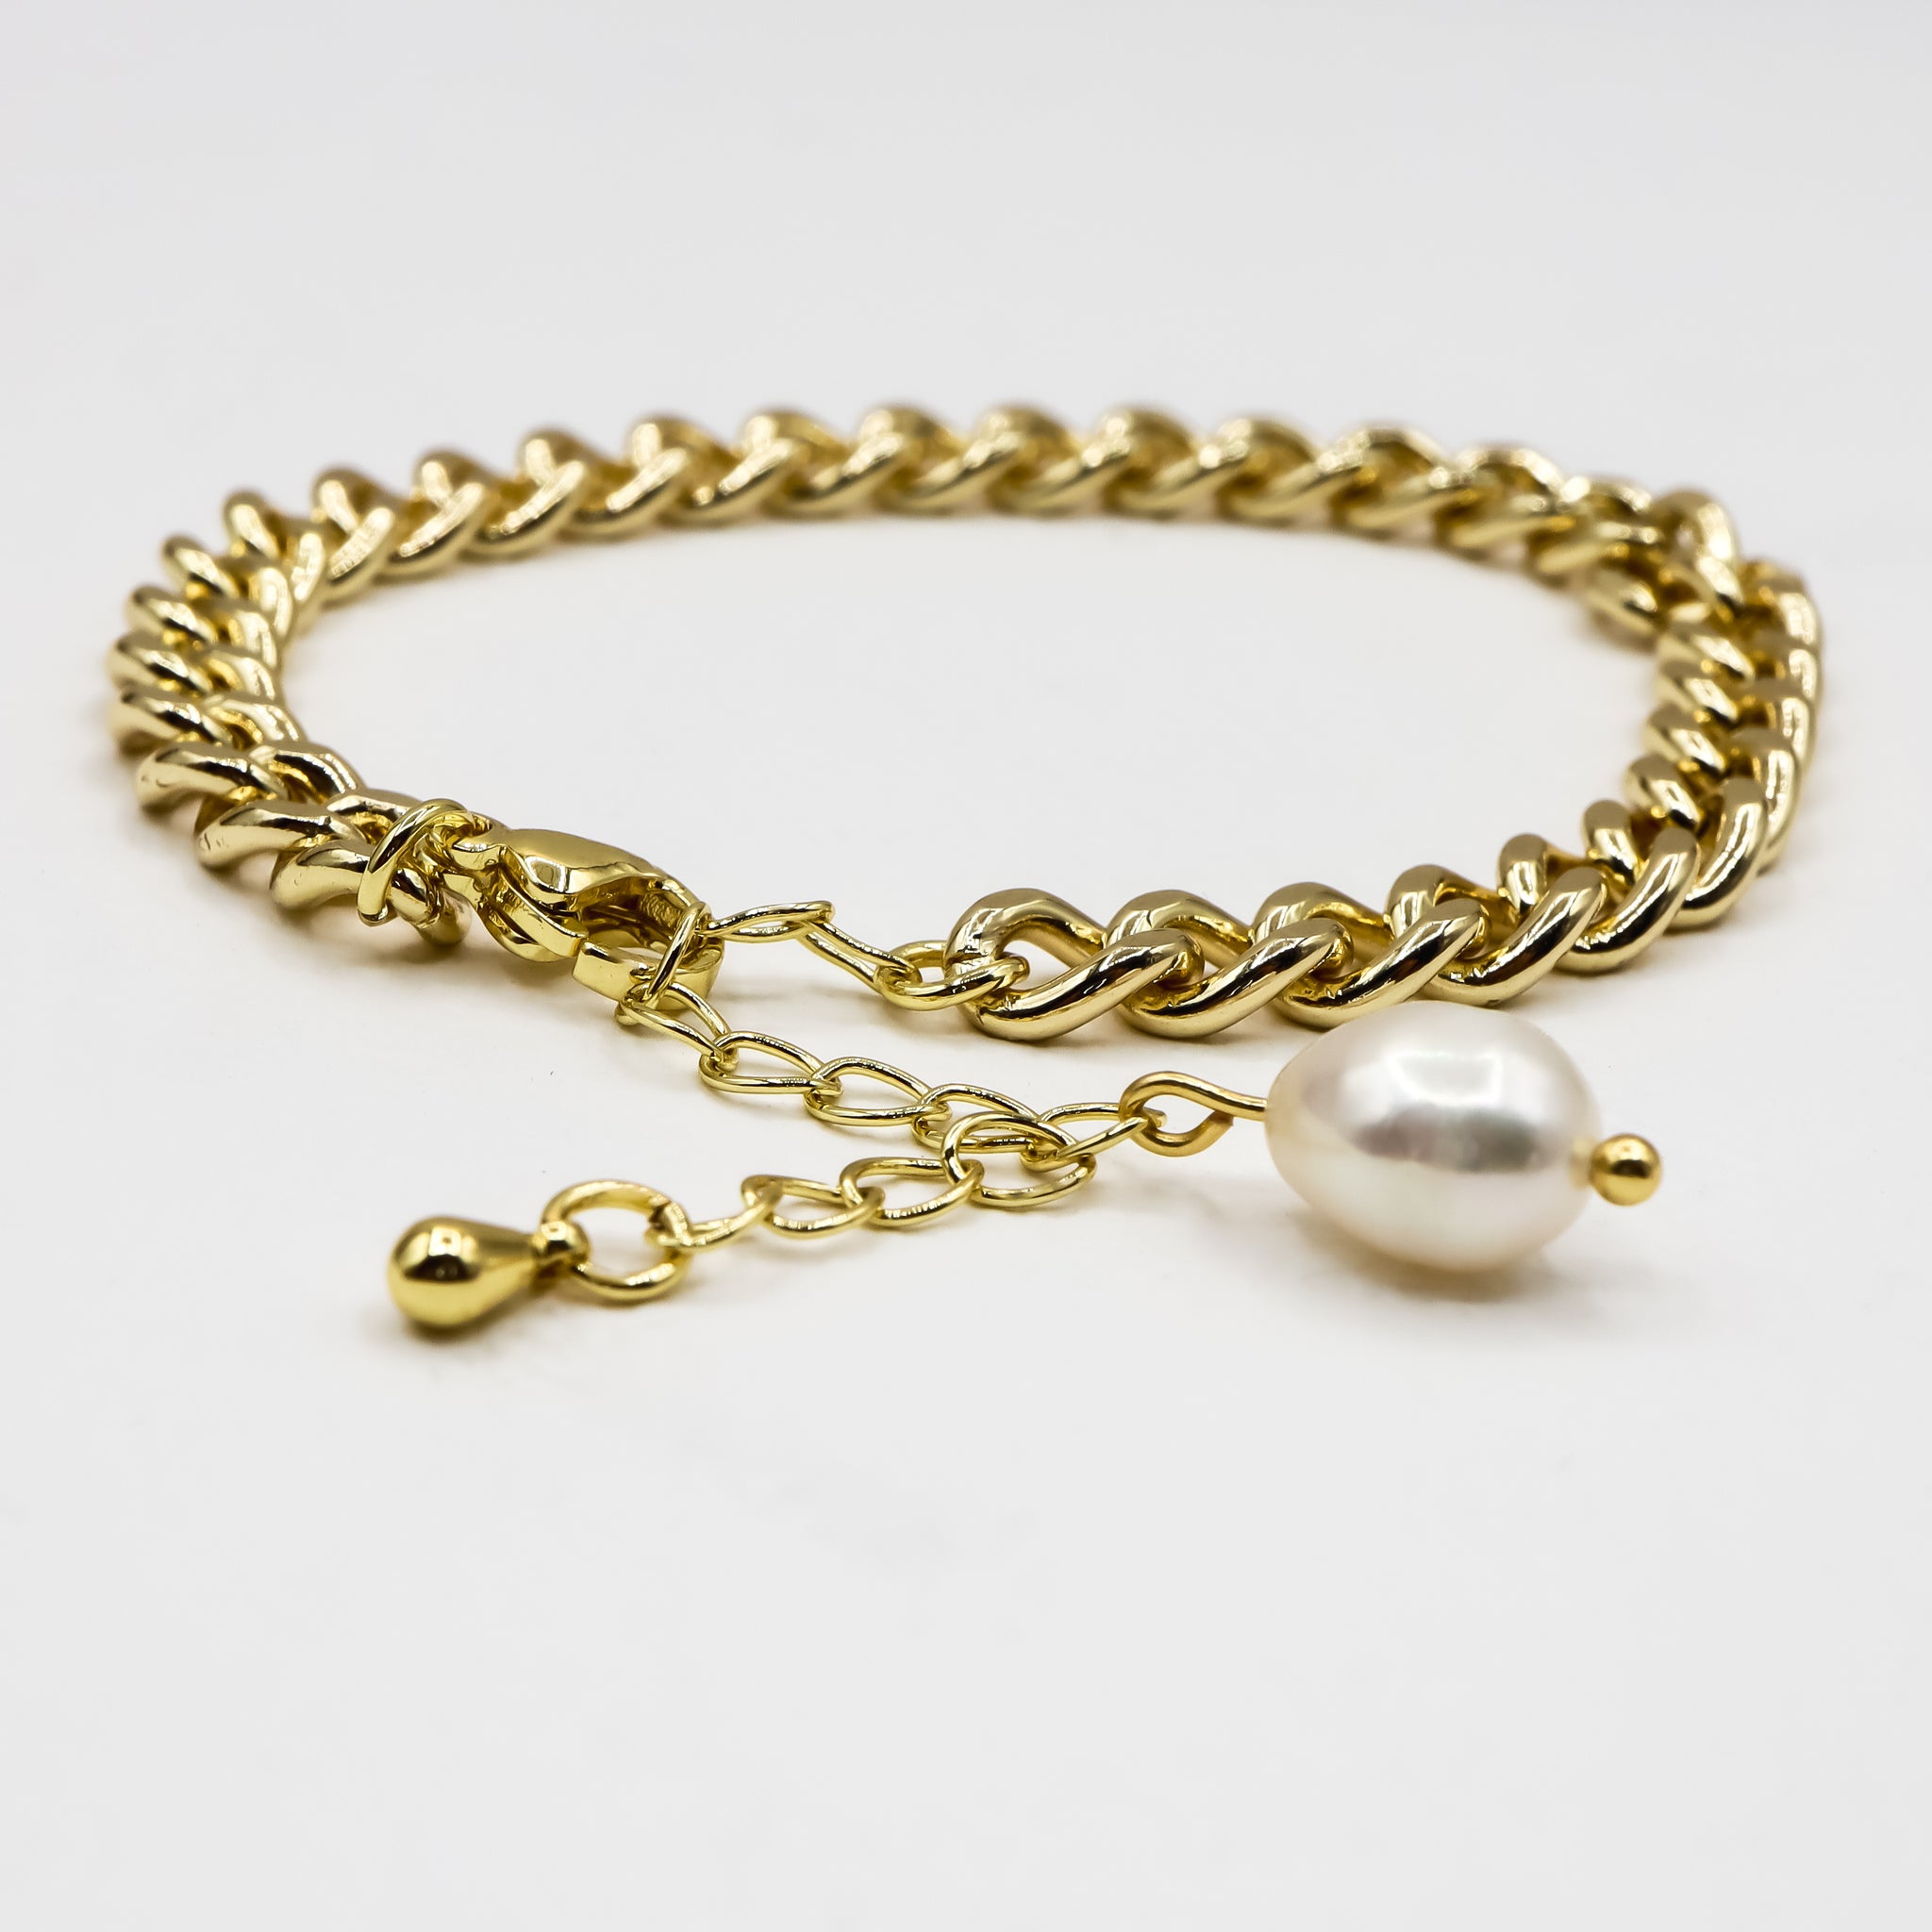 Gold Curb Chain Bracelet - 18K Goldplated